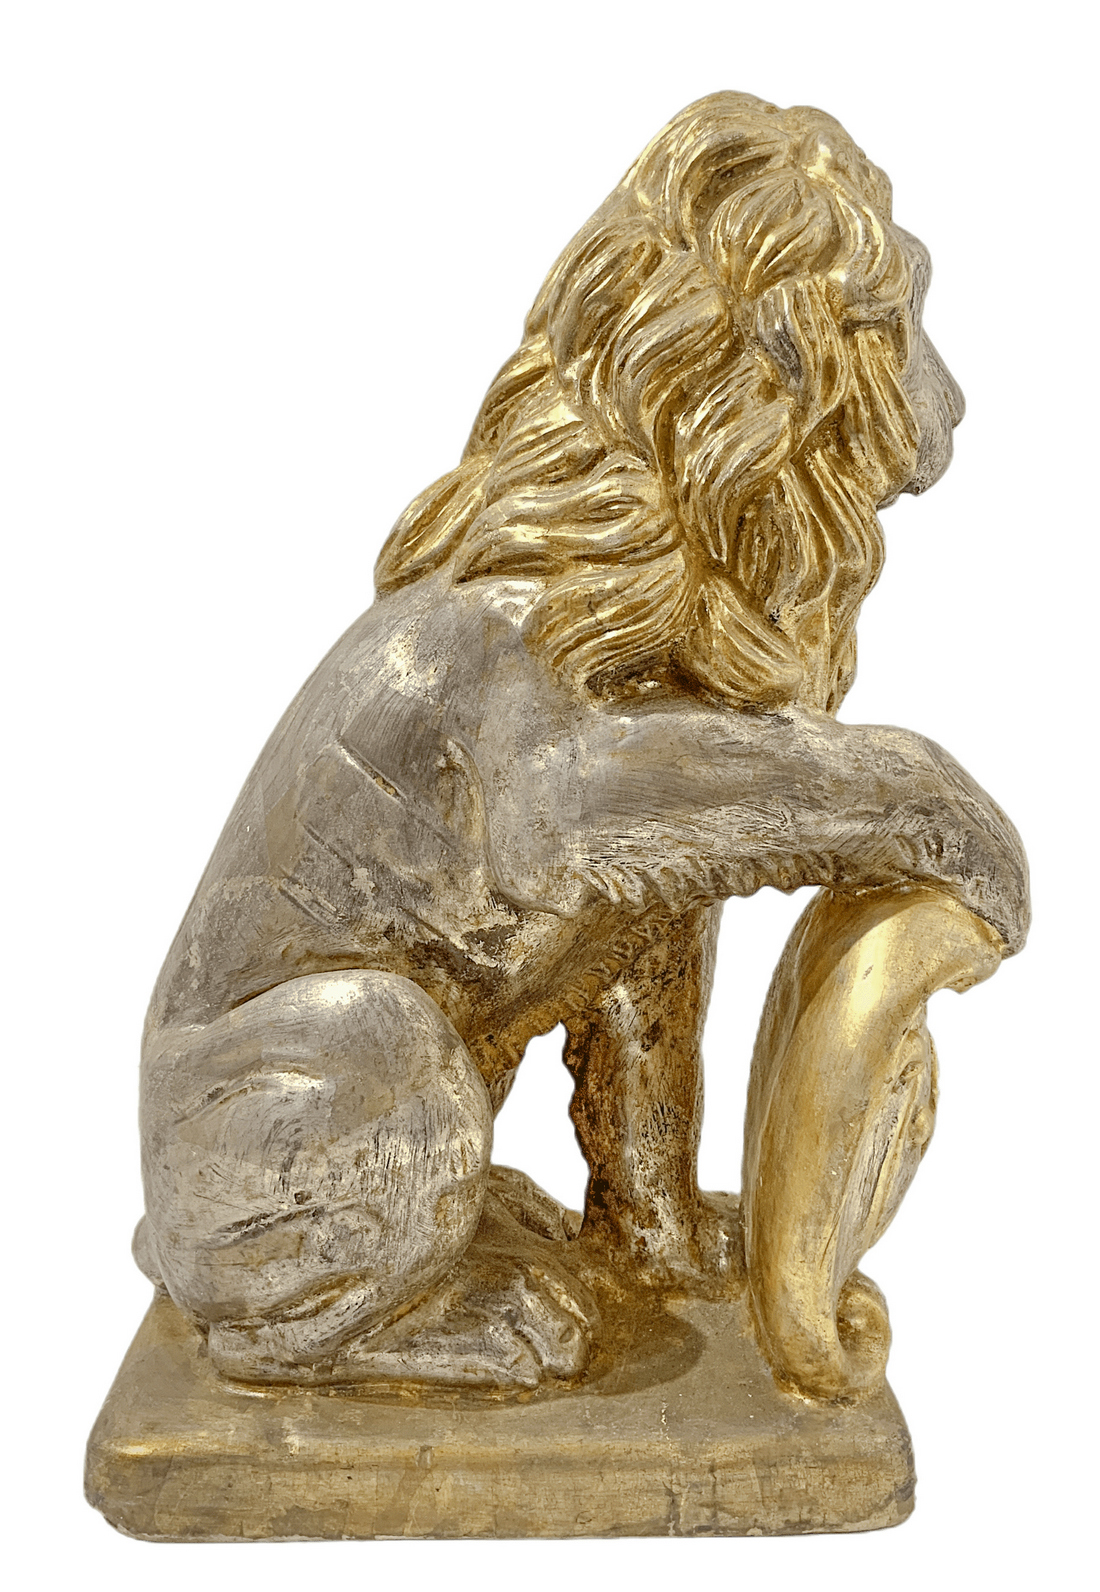 Pair of lions Marzocco of Florence in gold and silver wood, early twentieth century. H 40 cm, base 2 - Image 4 of 9